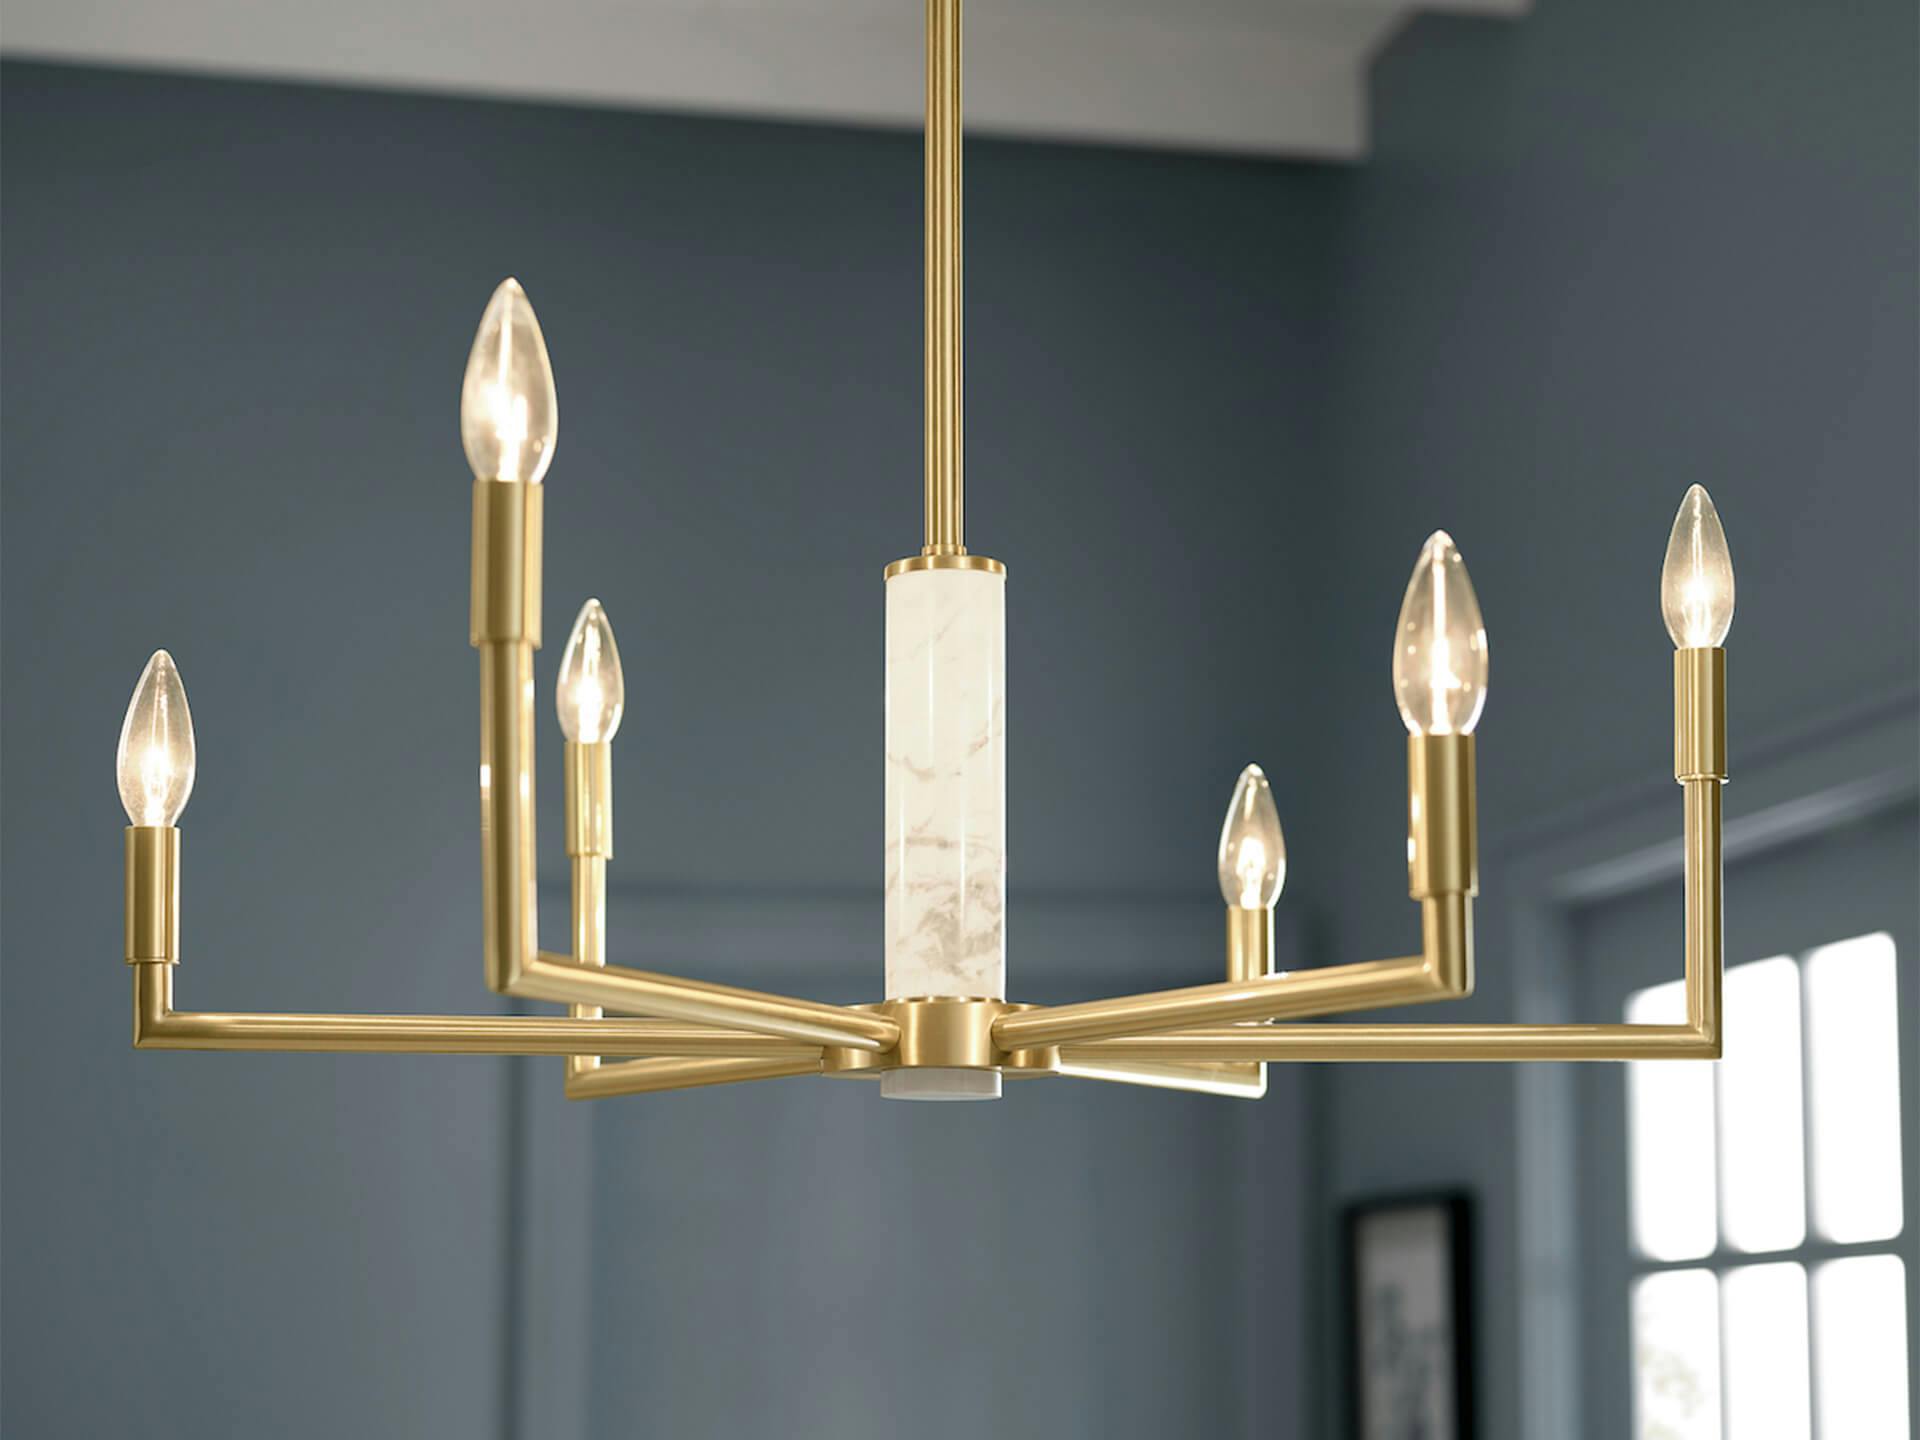 Detail shot of a 6 light Laurent chandelier with a gold finish and white marble detail